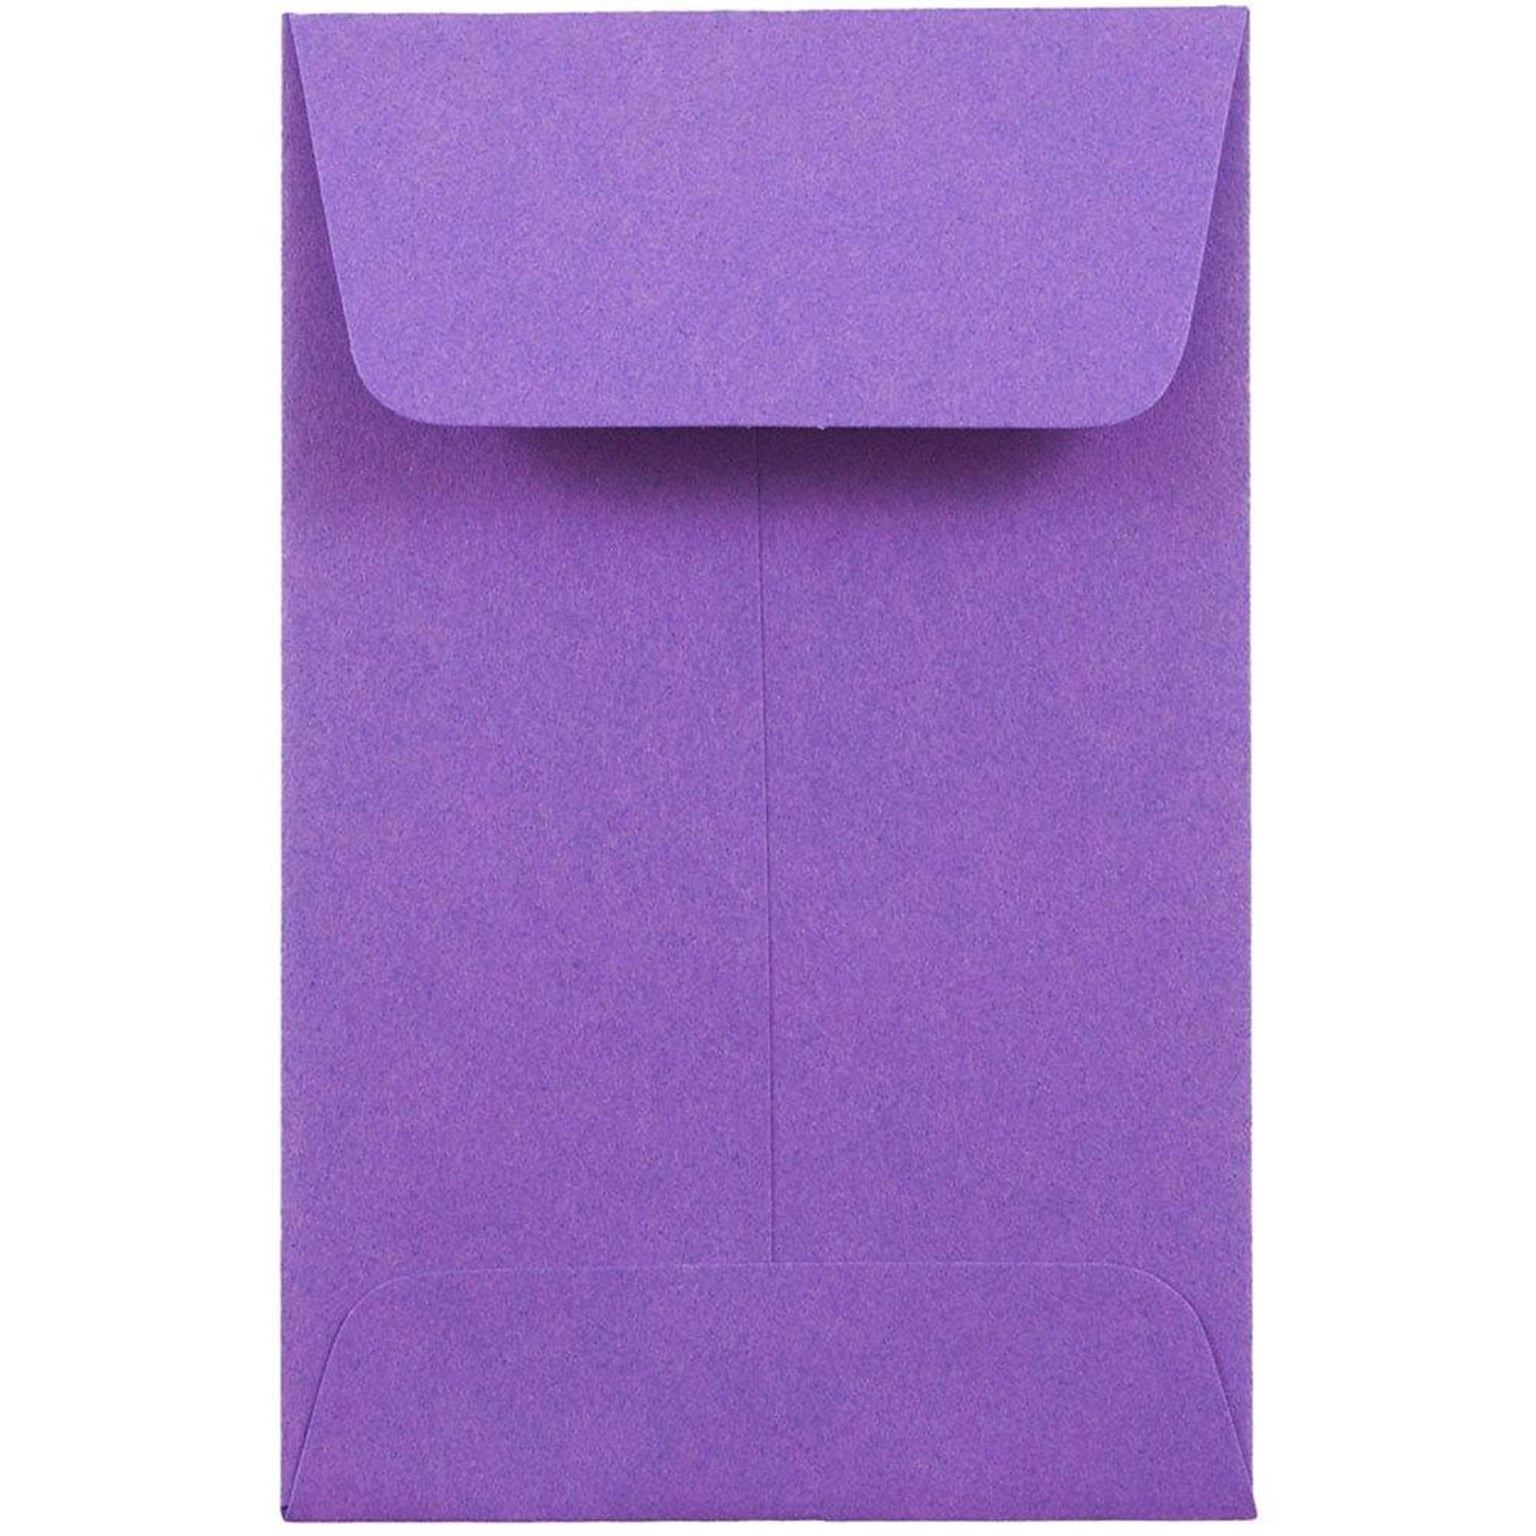 JAM Paper #1 Coin Business Colored Envelopes, 2.25 x 3.5, Violet Purple Recycled, 50/Pack (353027837I)